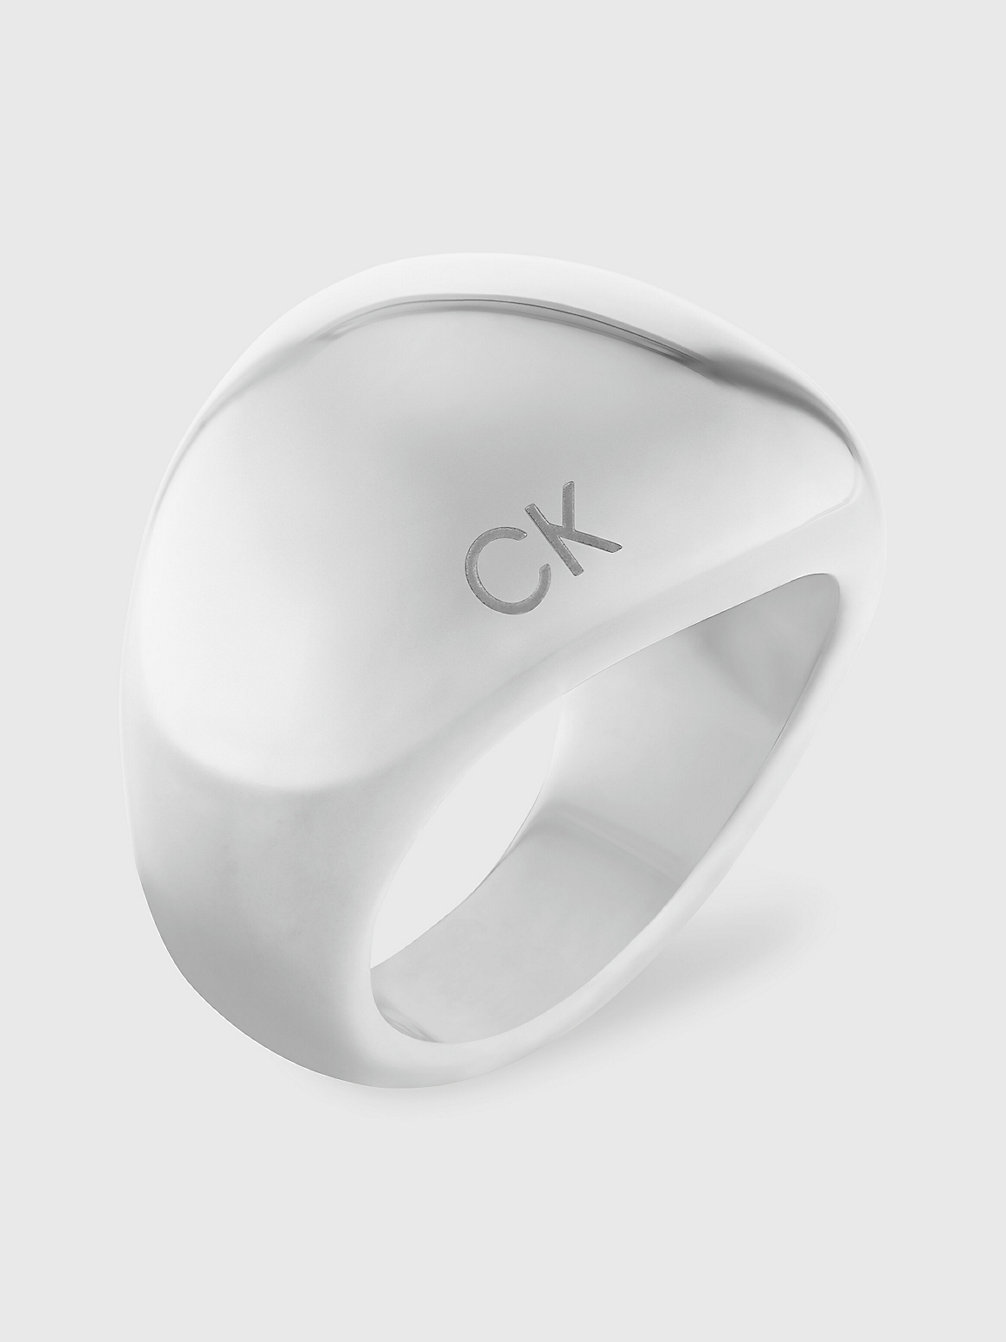 Anello - Playful Organic Shapes > SILVER > undefined donna > Calvin Klein